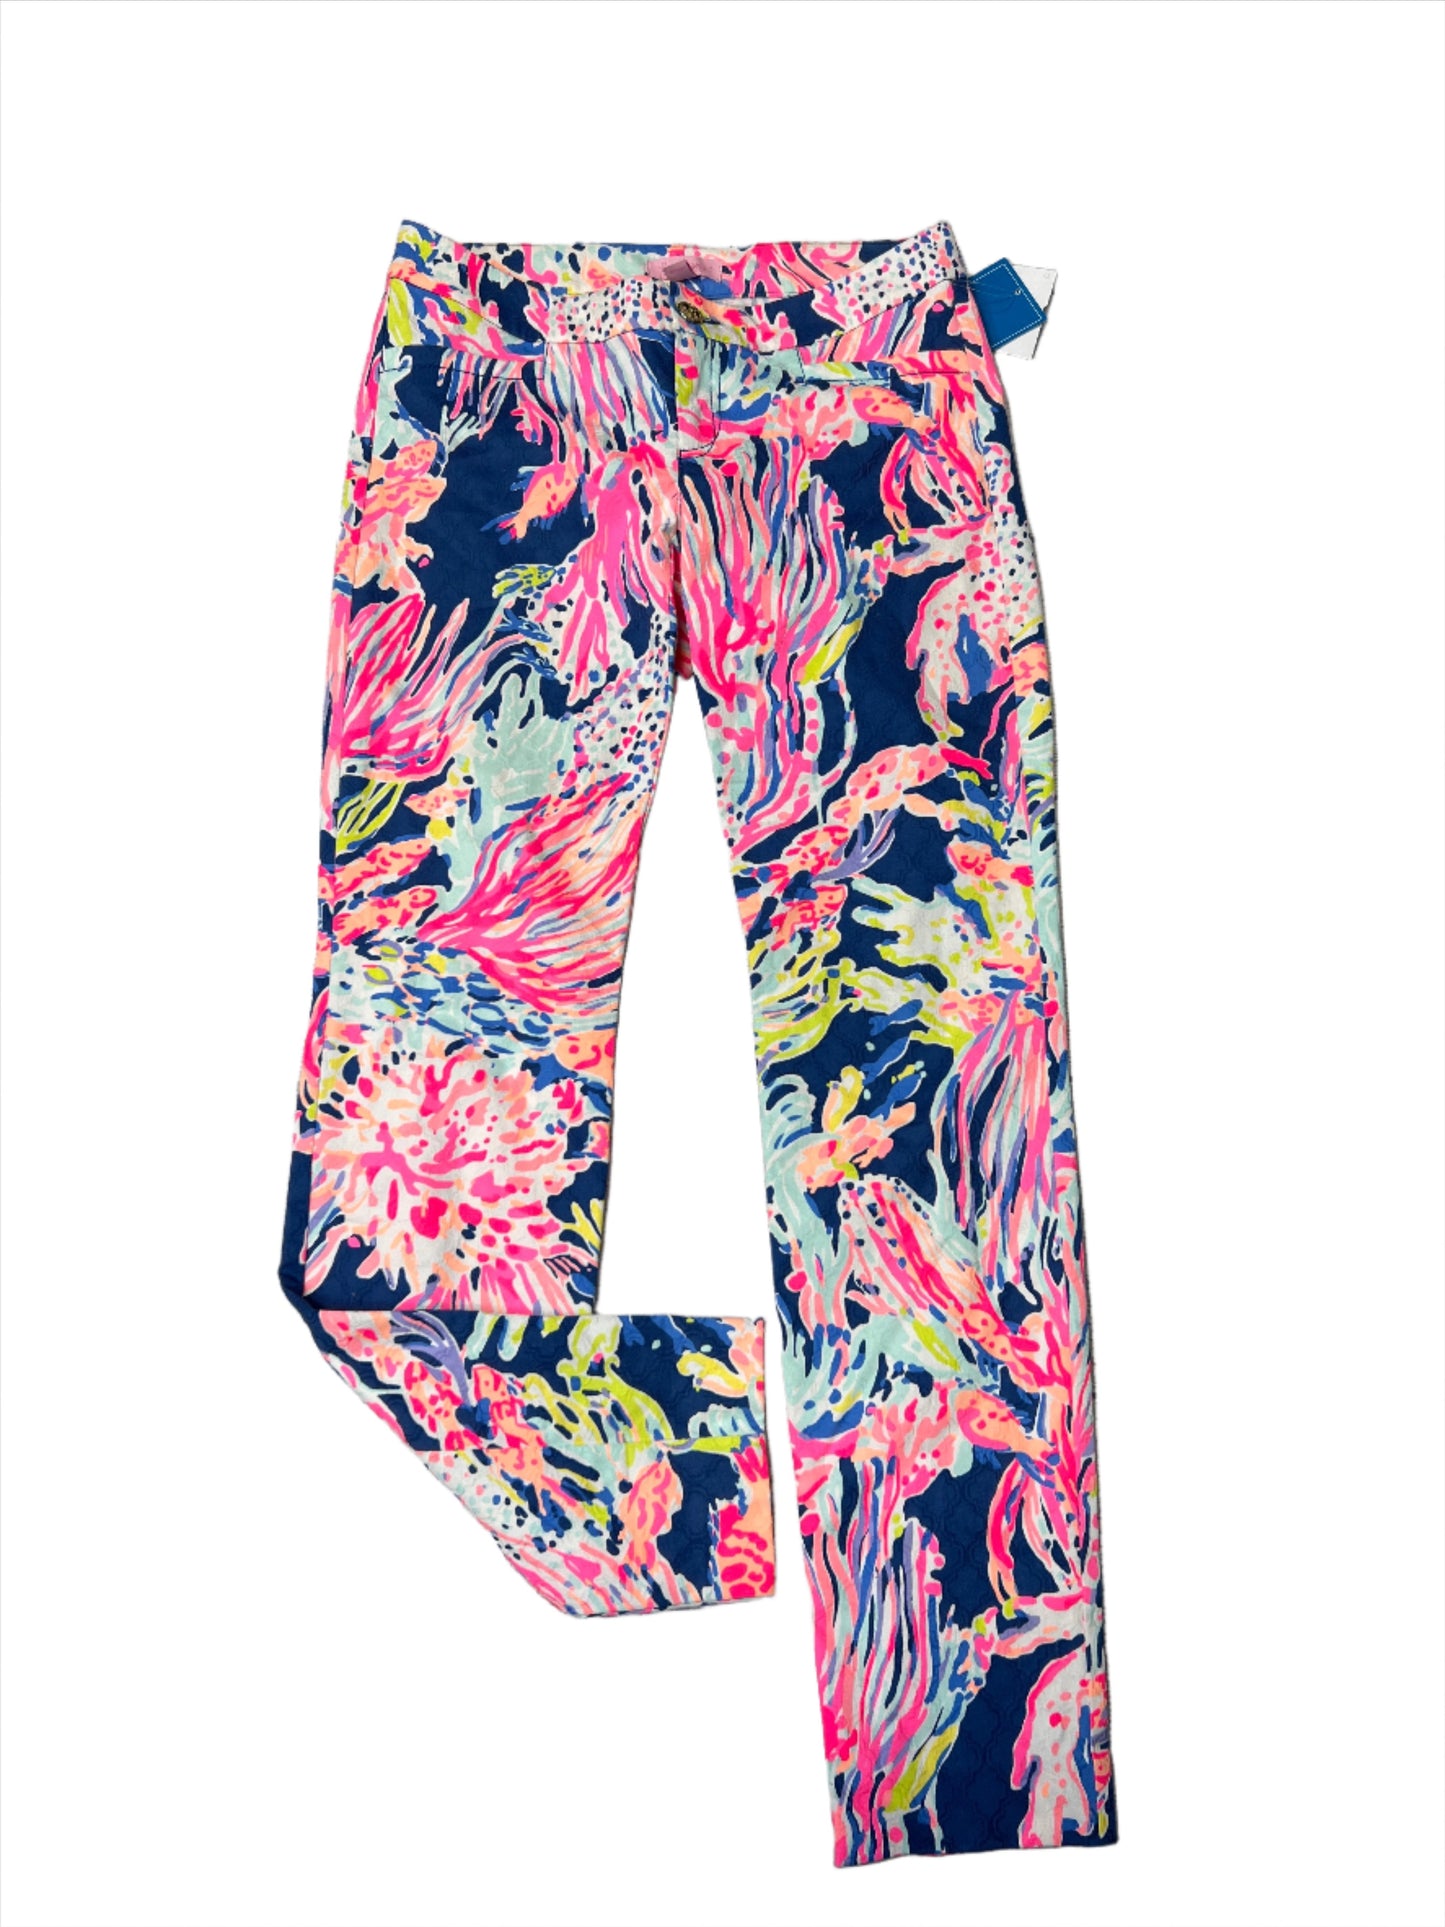 Pink Blue Pants Ankle Lilly Pulitzer, Size 0